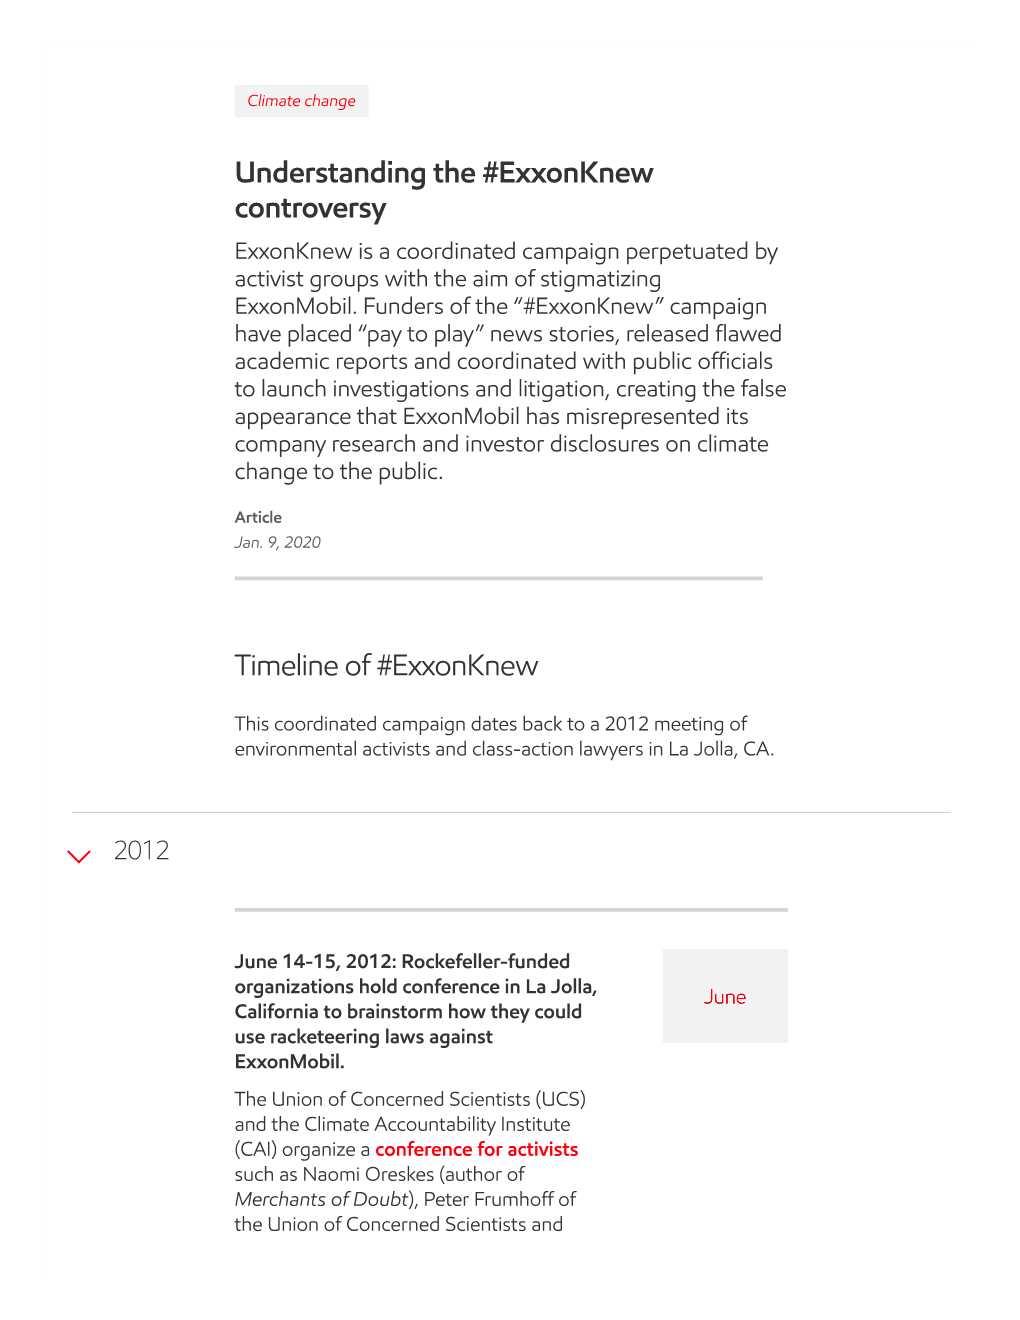 Understanding the #Exxonknew Controversy Exxonknew Is a Coordinated Campaign Perpetuated by Activist Groups with the Aim of Stigmatizing Exxonmobil